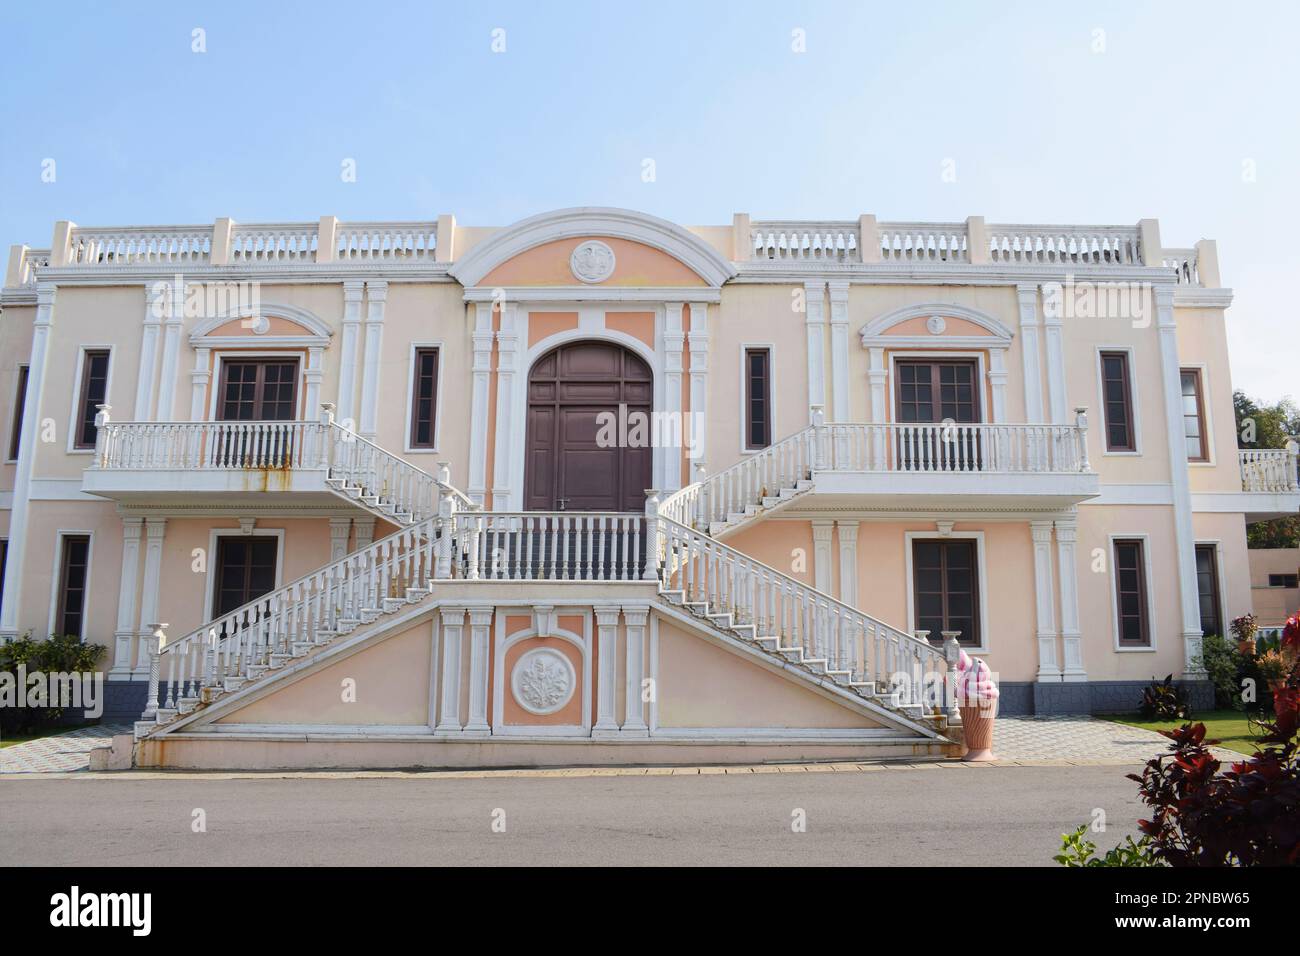 A Building of Movie Set, Ramoji Film City, Hyderabad, India. Featuring diverse architectural styles, streetscapes, and backdrops, attracting film prod Stock Photo